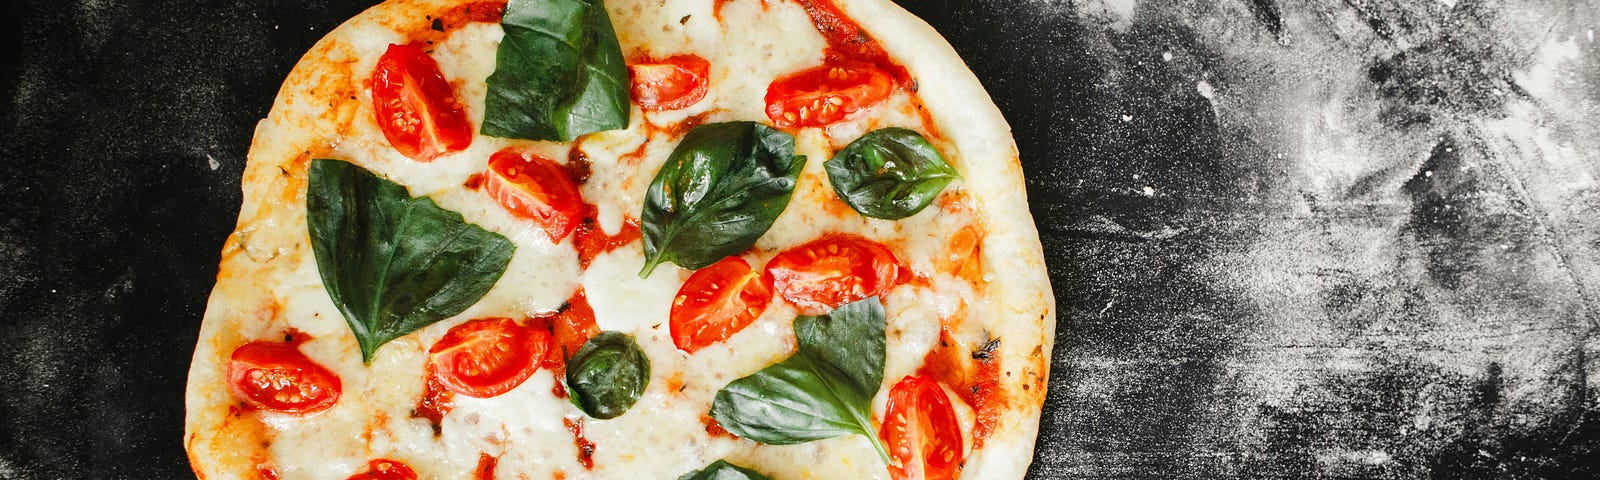 A pizza with sliced tomatoes and basil on a dusted black countertop